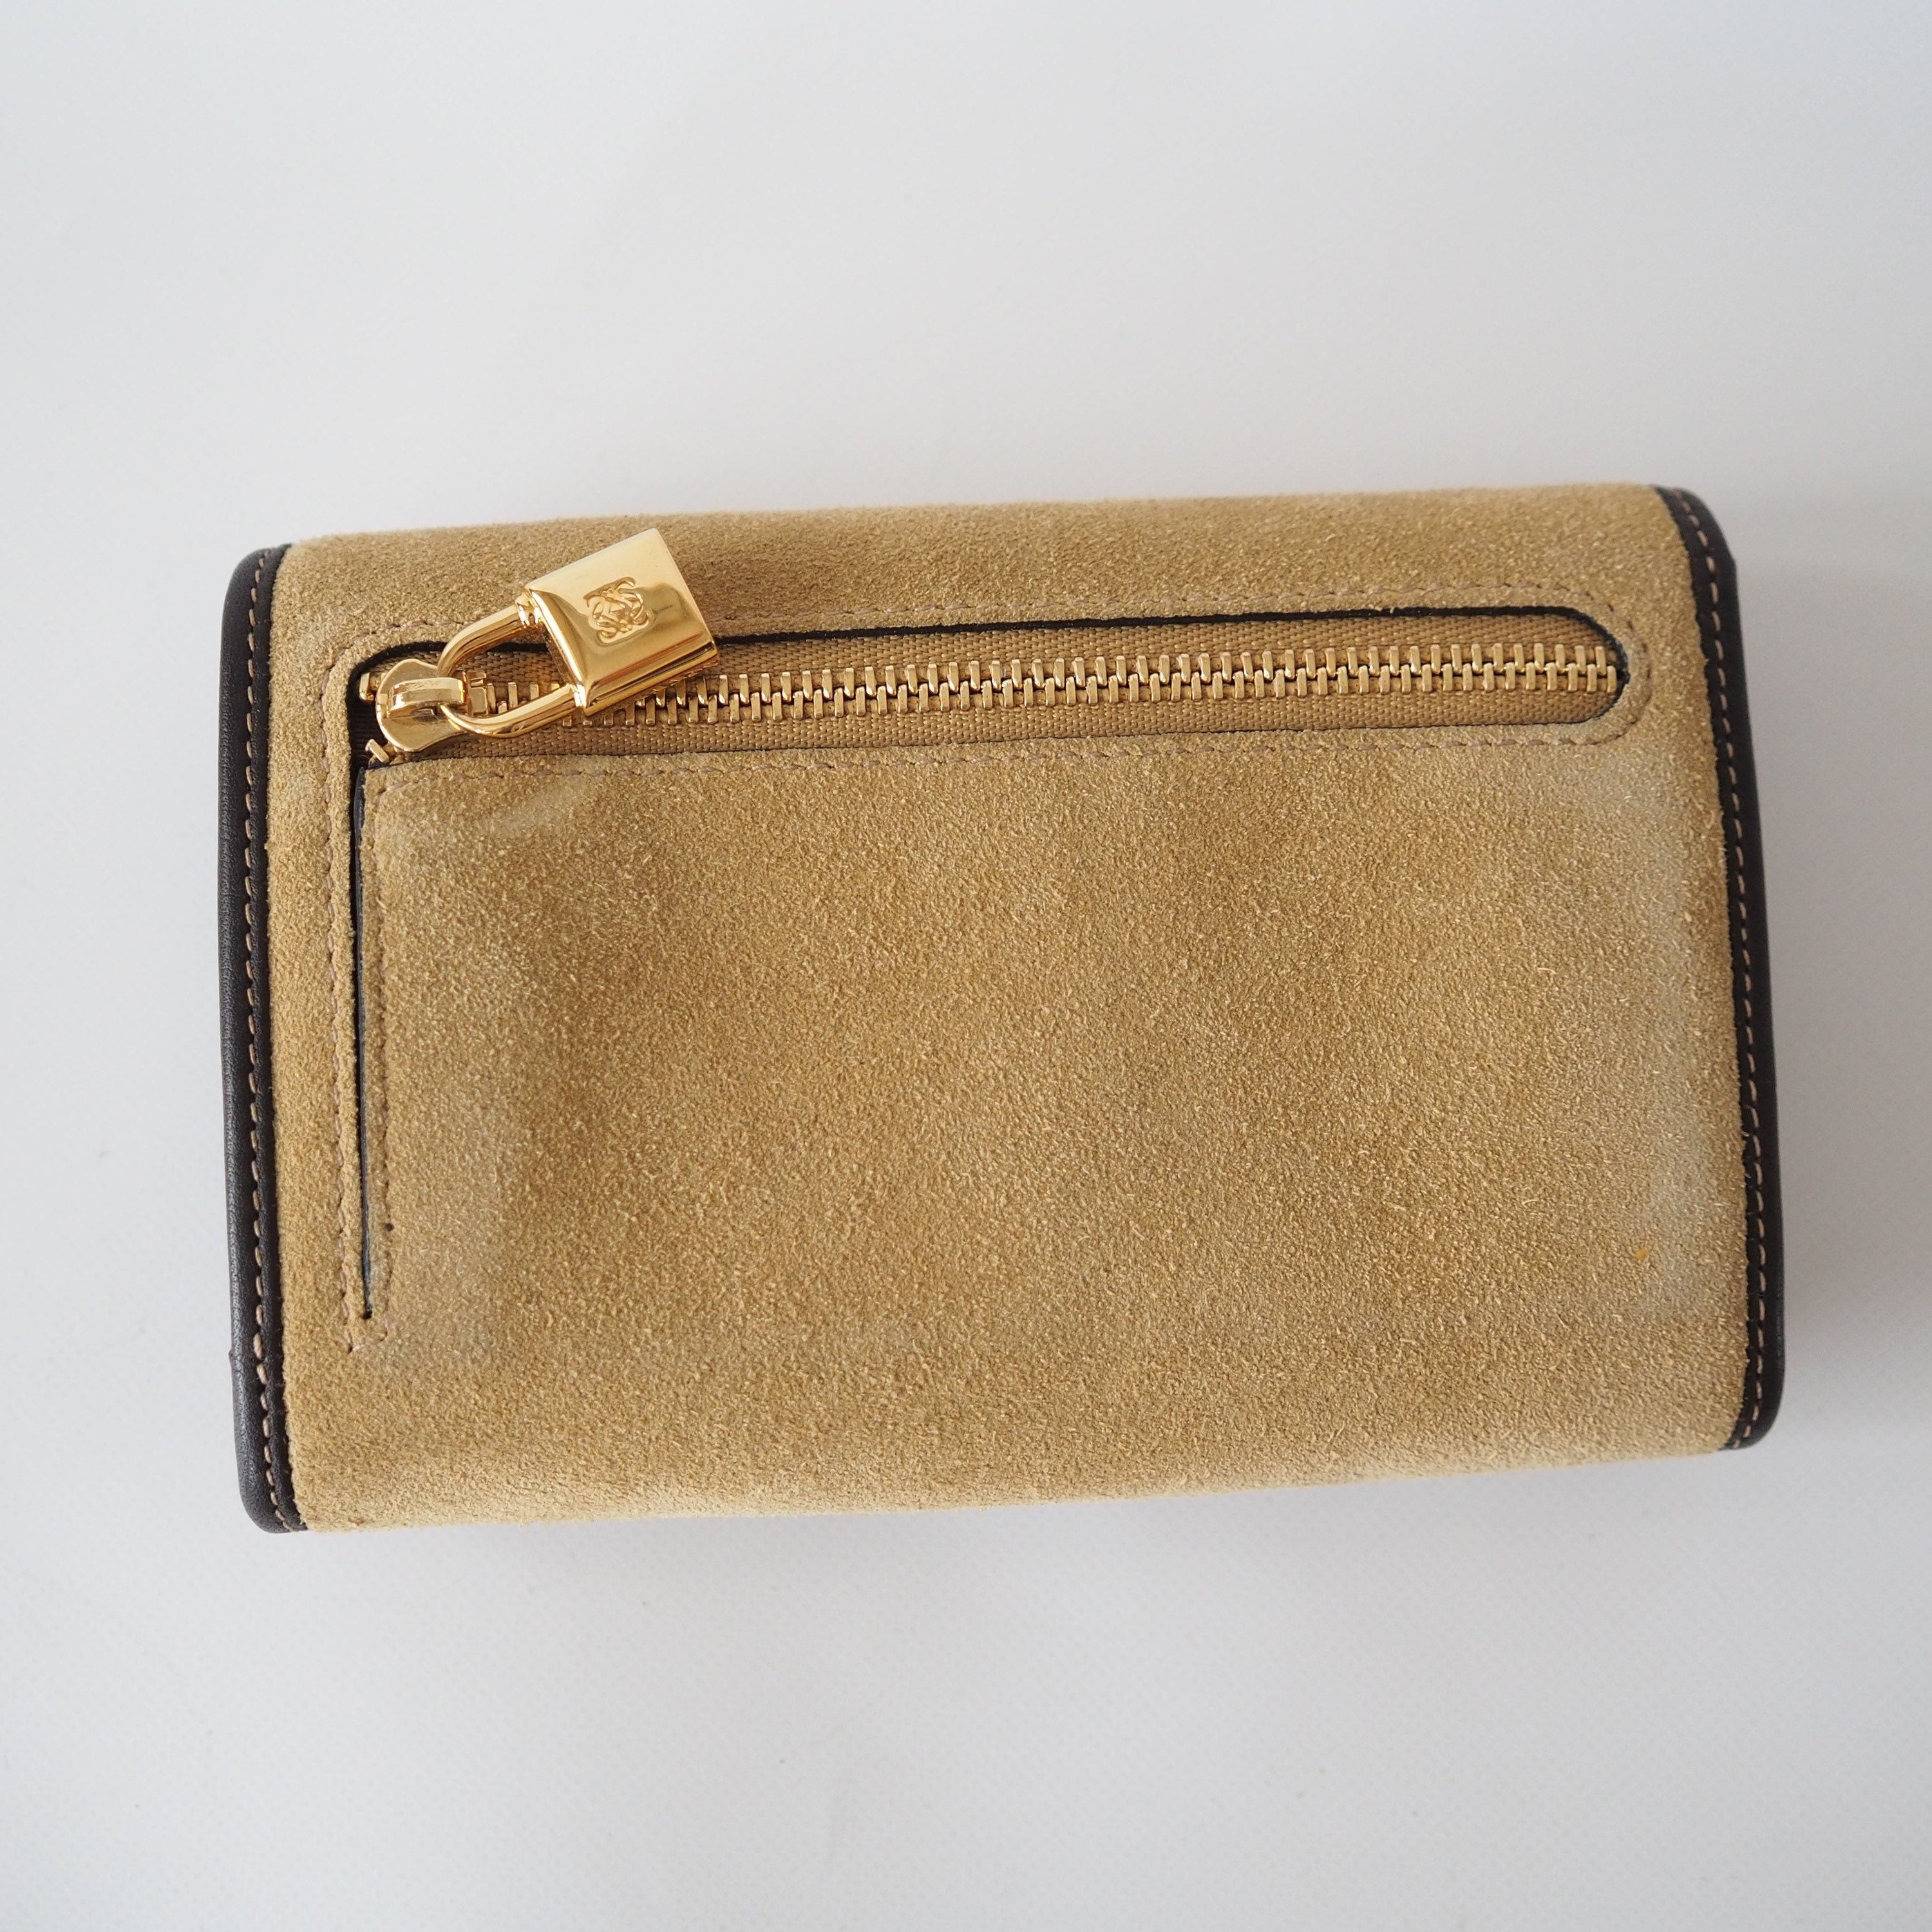 LOEWE Anagram Compact Wallet Suede Leather Beige Brown Authentic